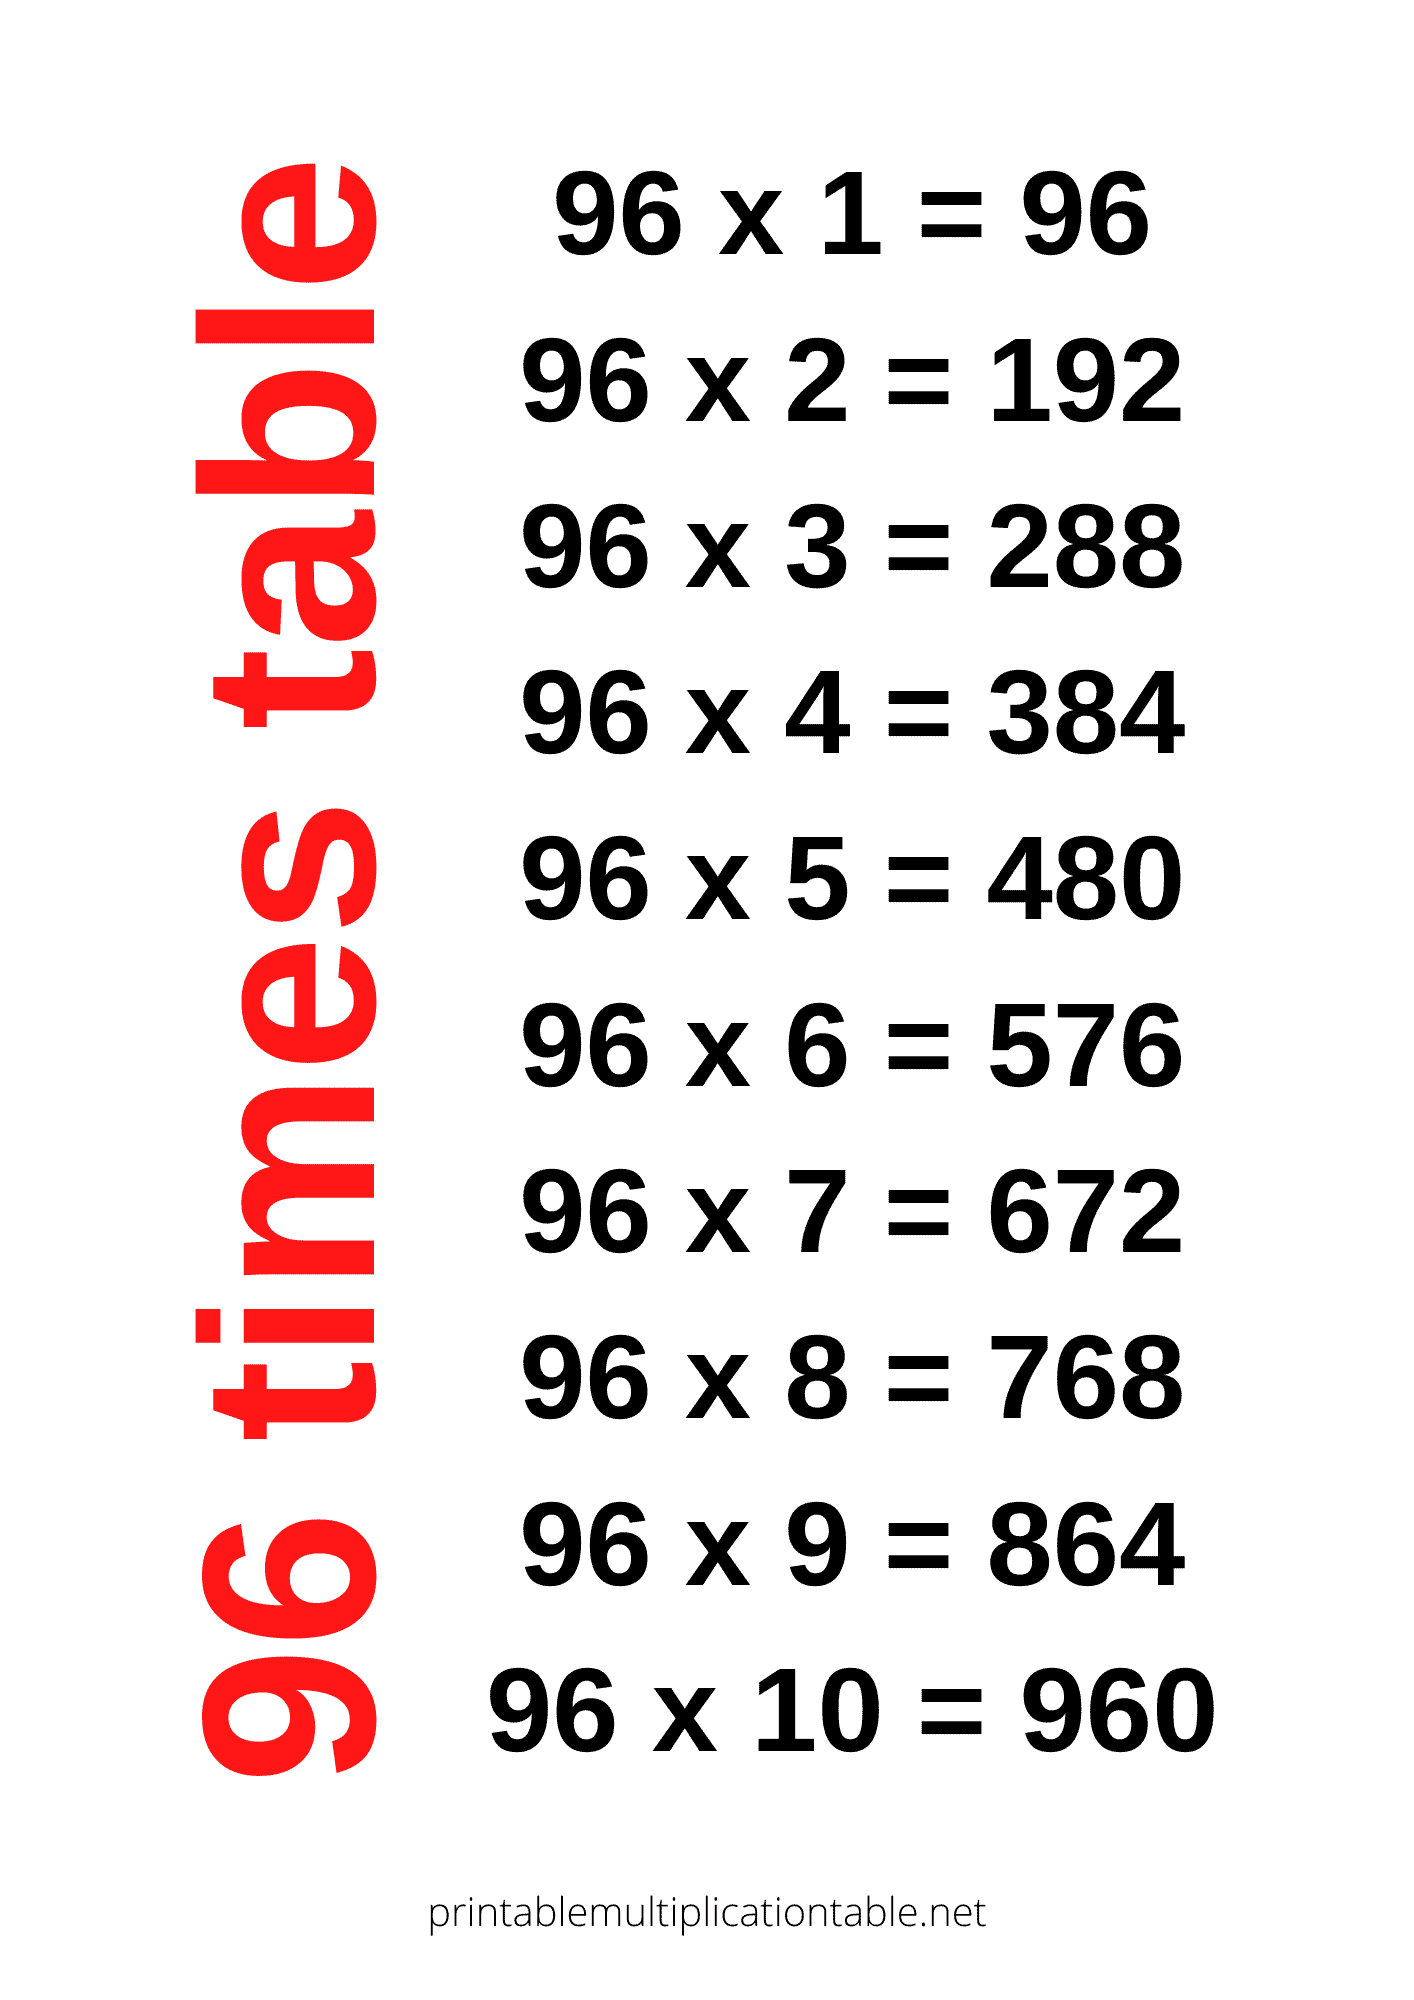 96 times table chart